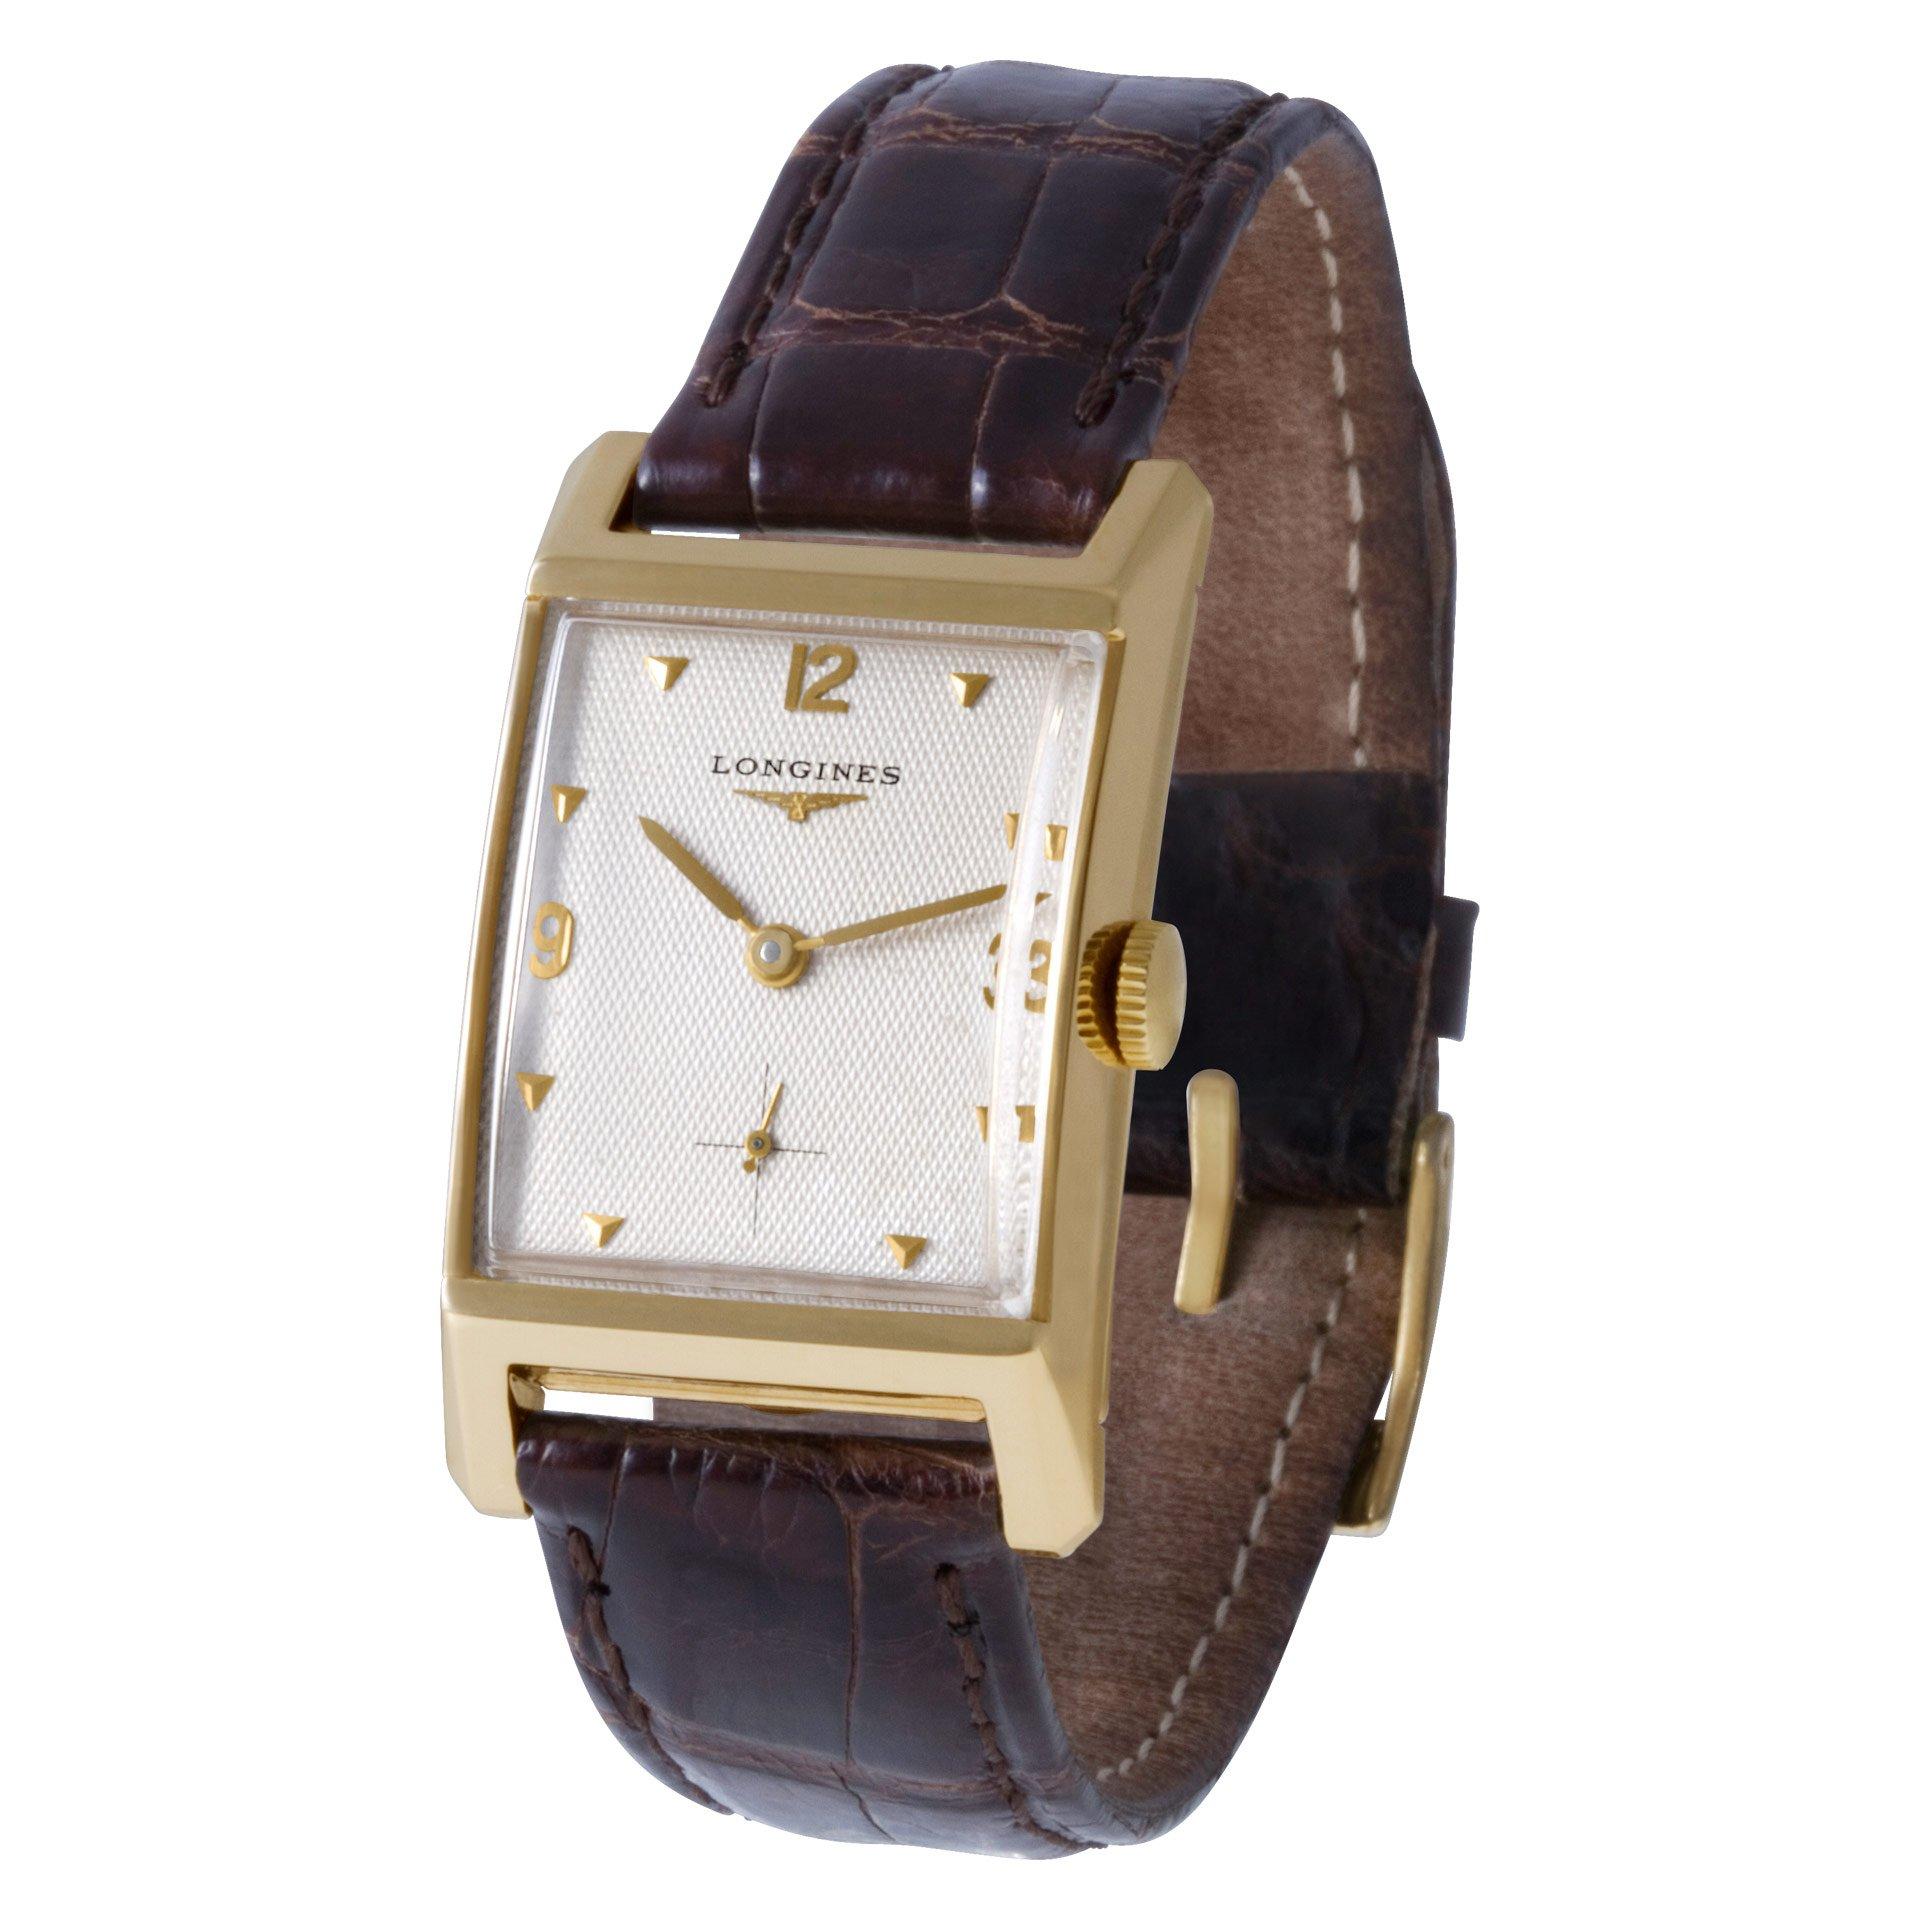 Vintage Longines Classic in 14k on a brown alligator strap with 18k tang buckle. 24 mm Case size. Manual. Fine Pre-owned Longines Watch.

Certified preowned Vintage Longines Classic watch is made out of yellow gold on a Brown Leather Original band